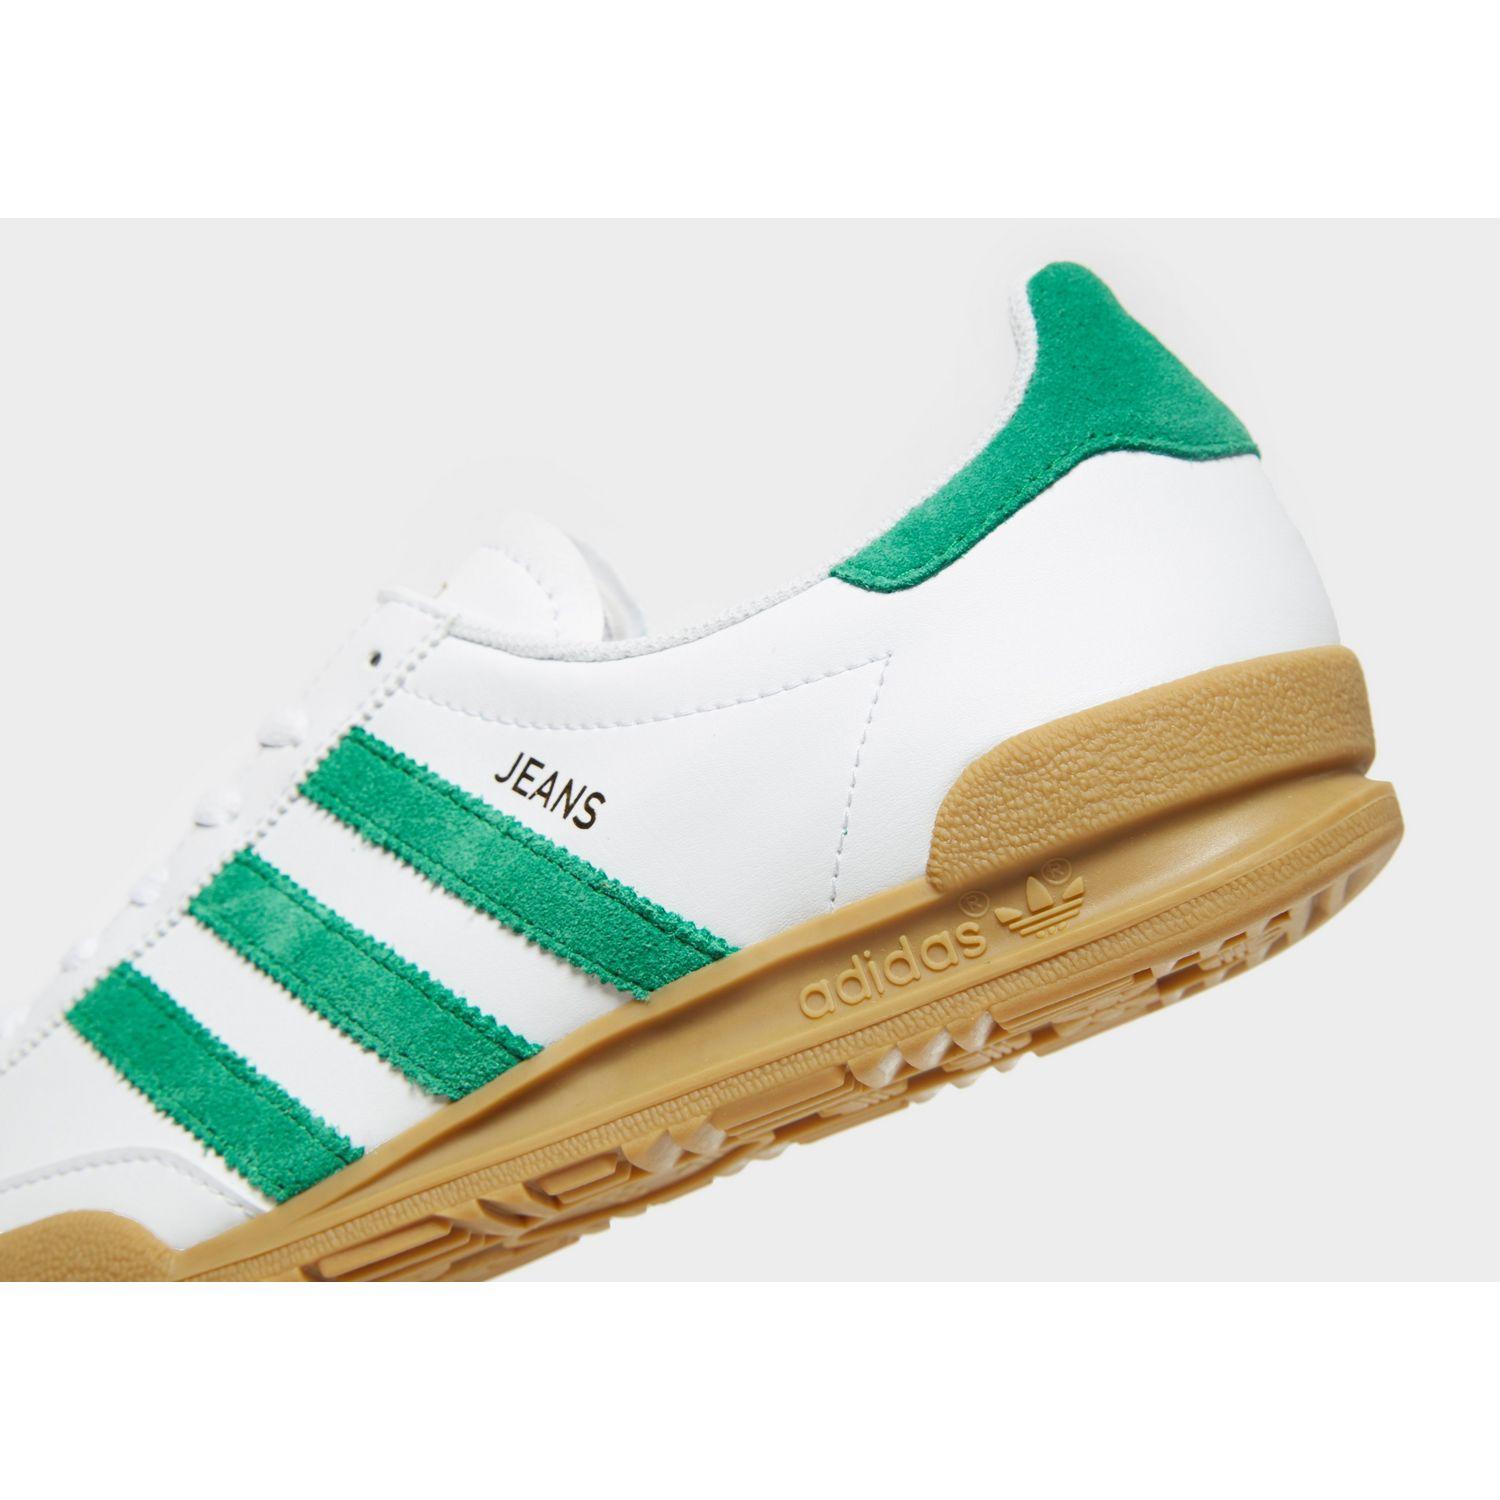 adidas jeans green and white